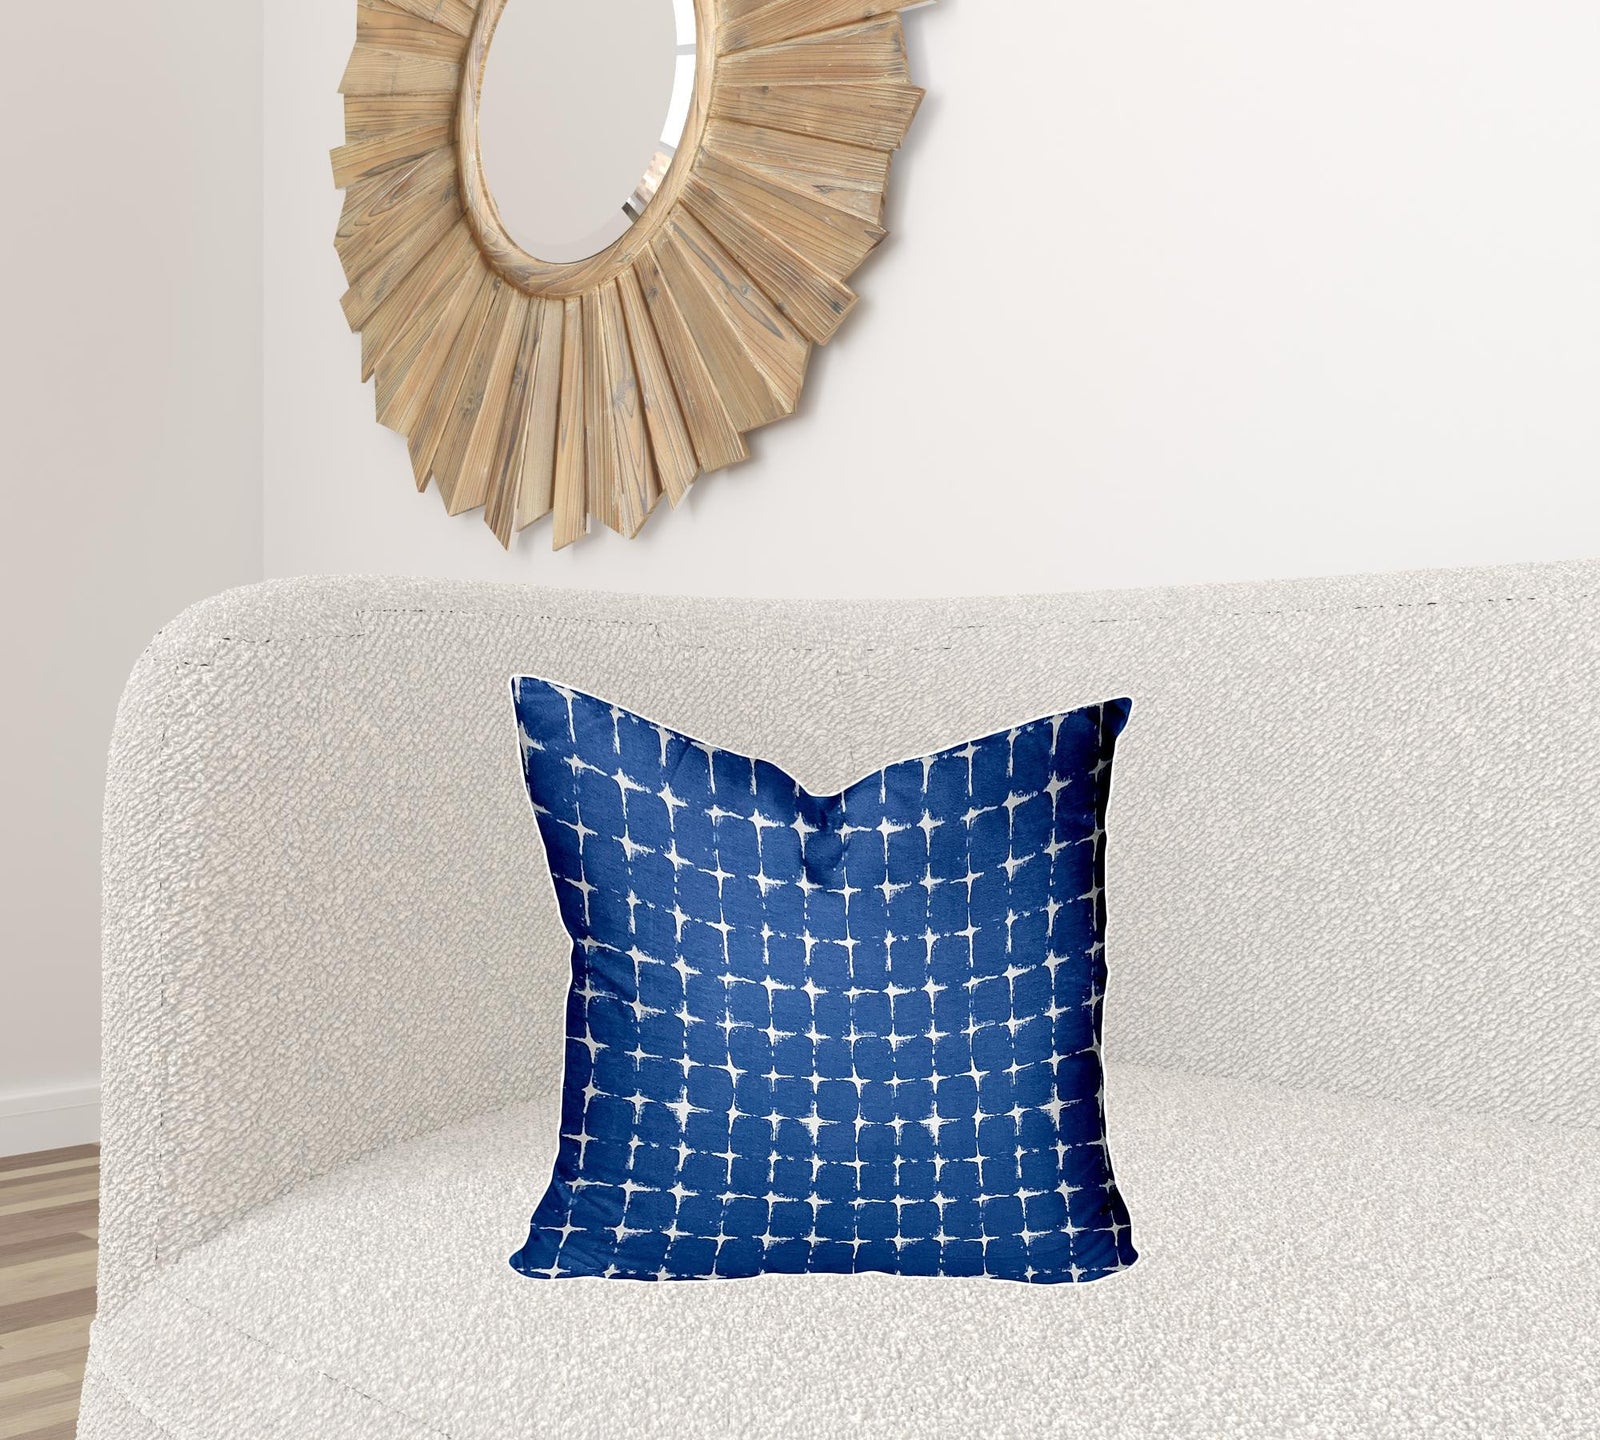 20" X 20" Blue And White Zippered Gingham Throw Indoor Outdoor Pillow Cover